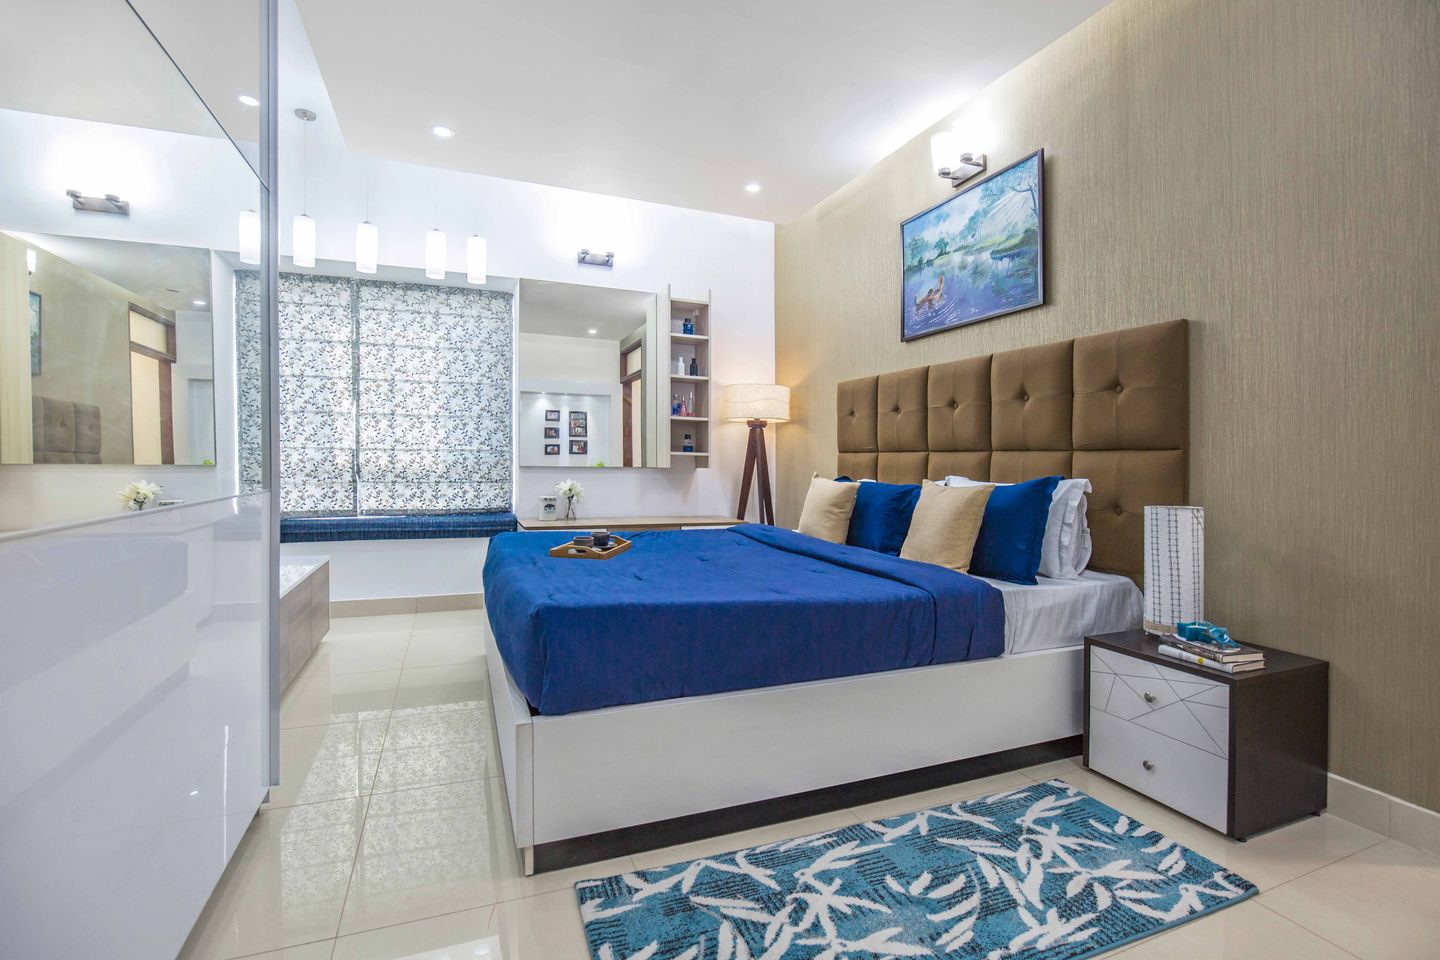 Master Bedroom With Bright Blue Queen-Size Bed And Brown Headboard, White And Wood Side Tables And Dressing Unit - Livspace